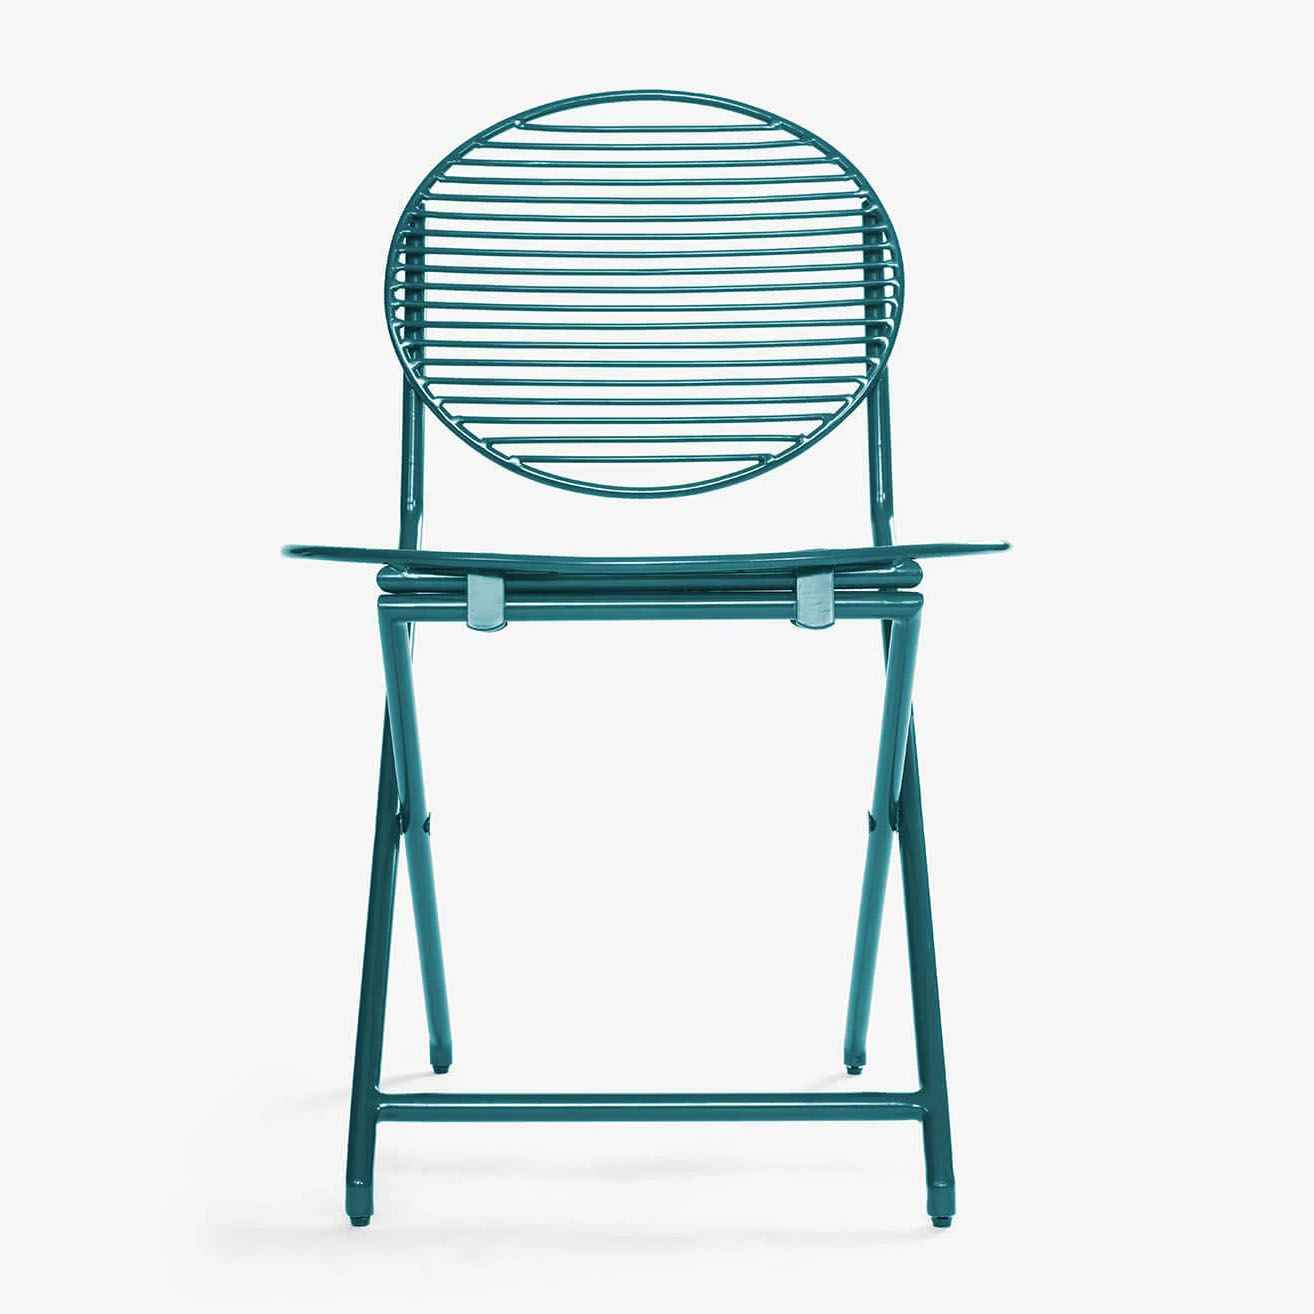 Ortside Textiline Dining Chair